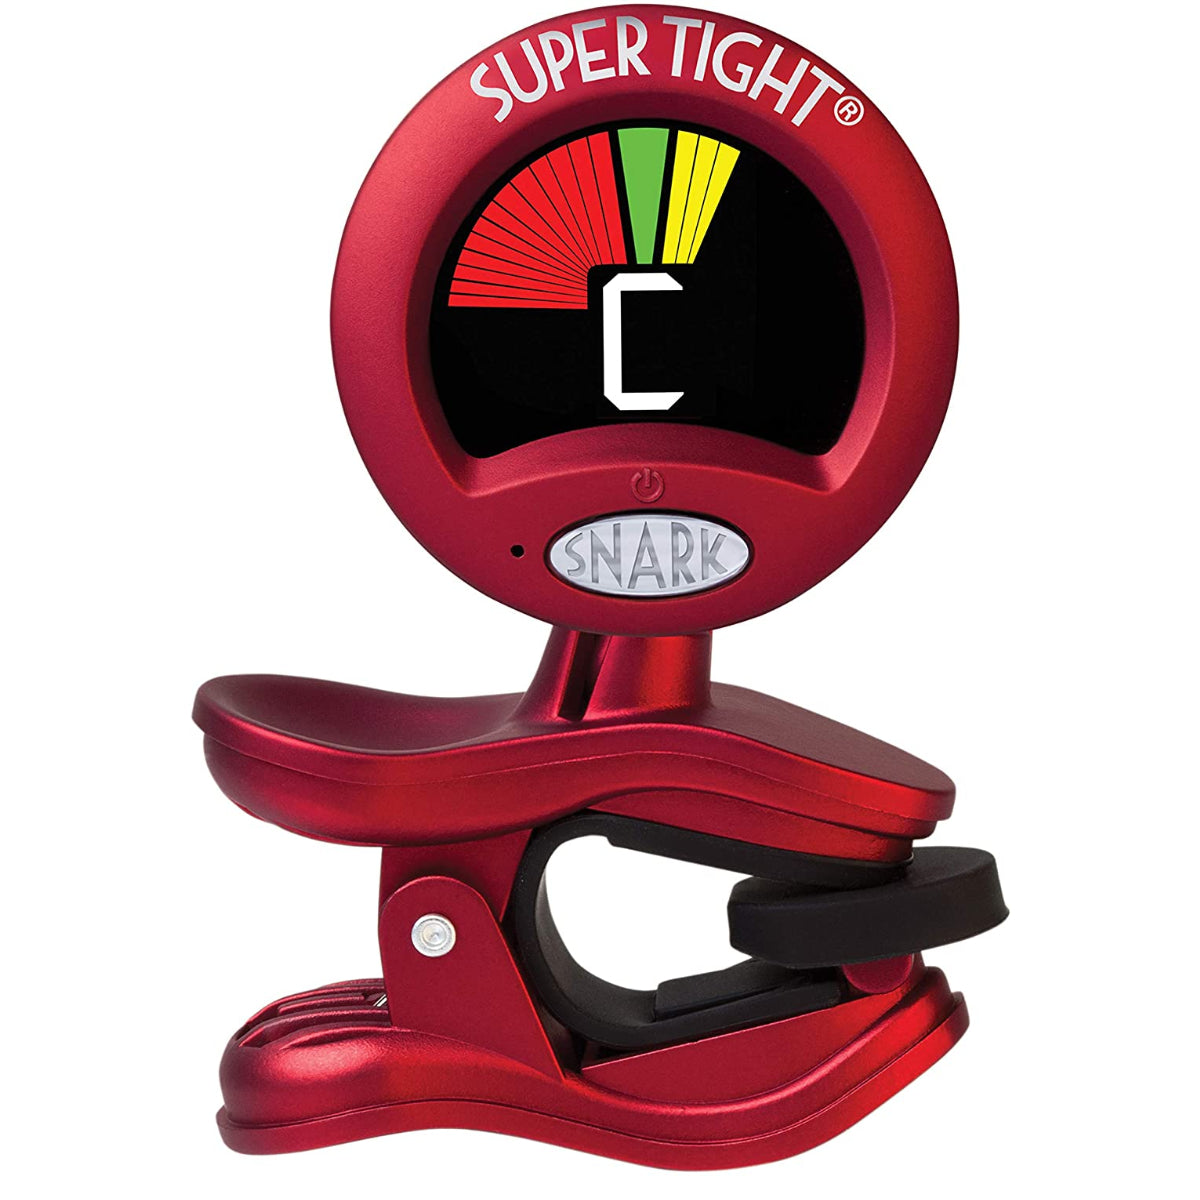 Snark ST-2 Clip-On Chromatic Tuner with Metronome - Red